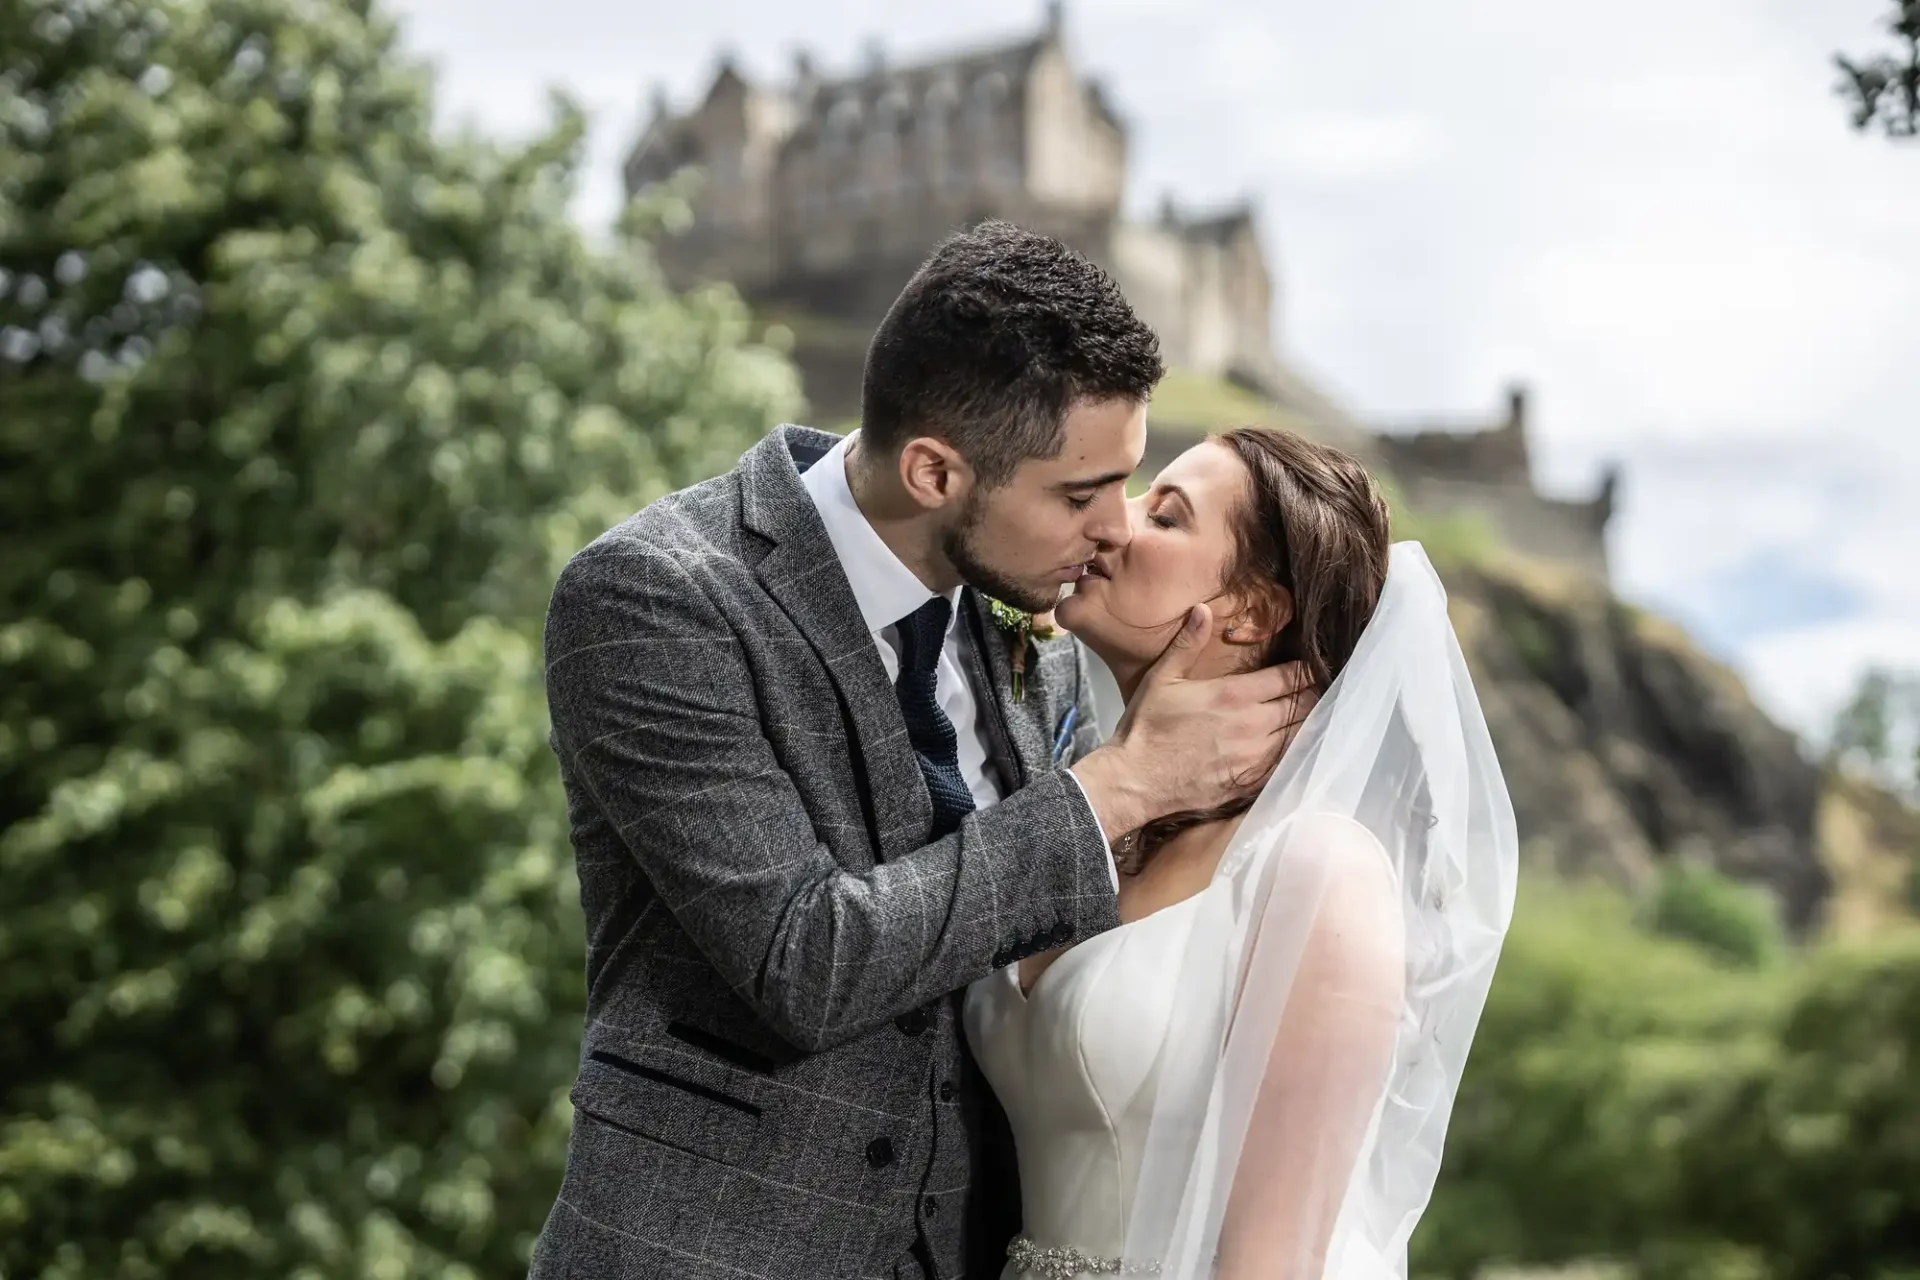 A bride and groom kissing outdoors with a castle on a hill in the background.